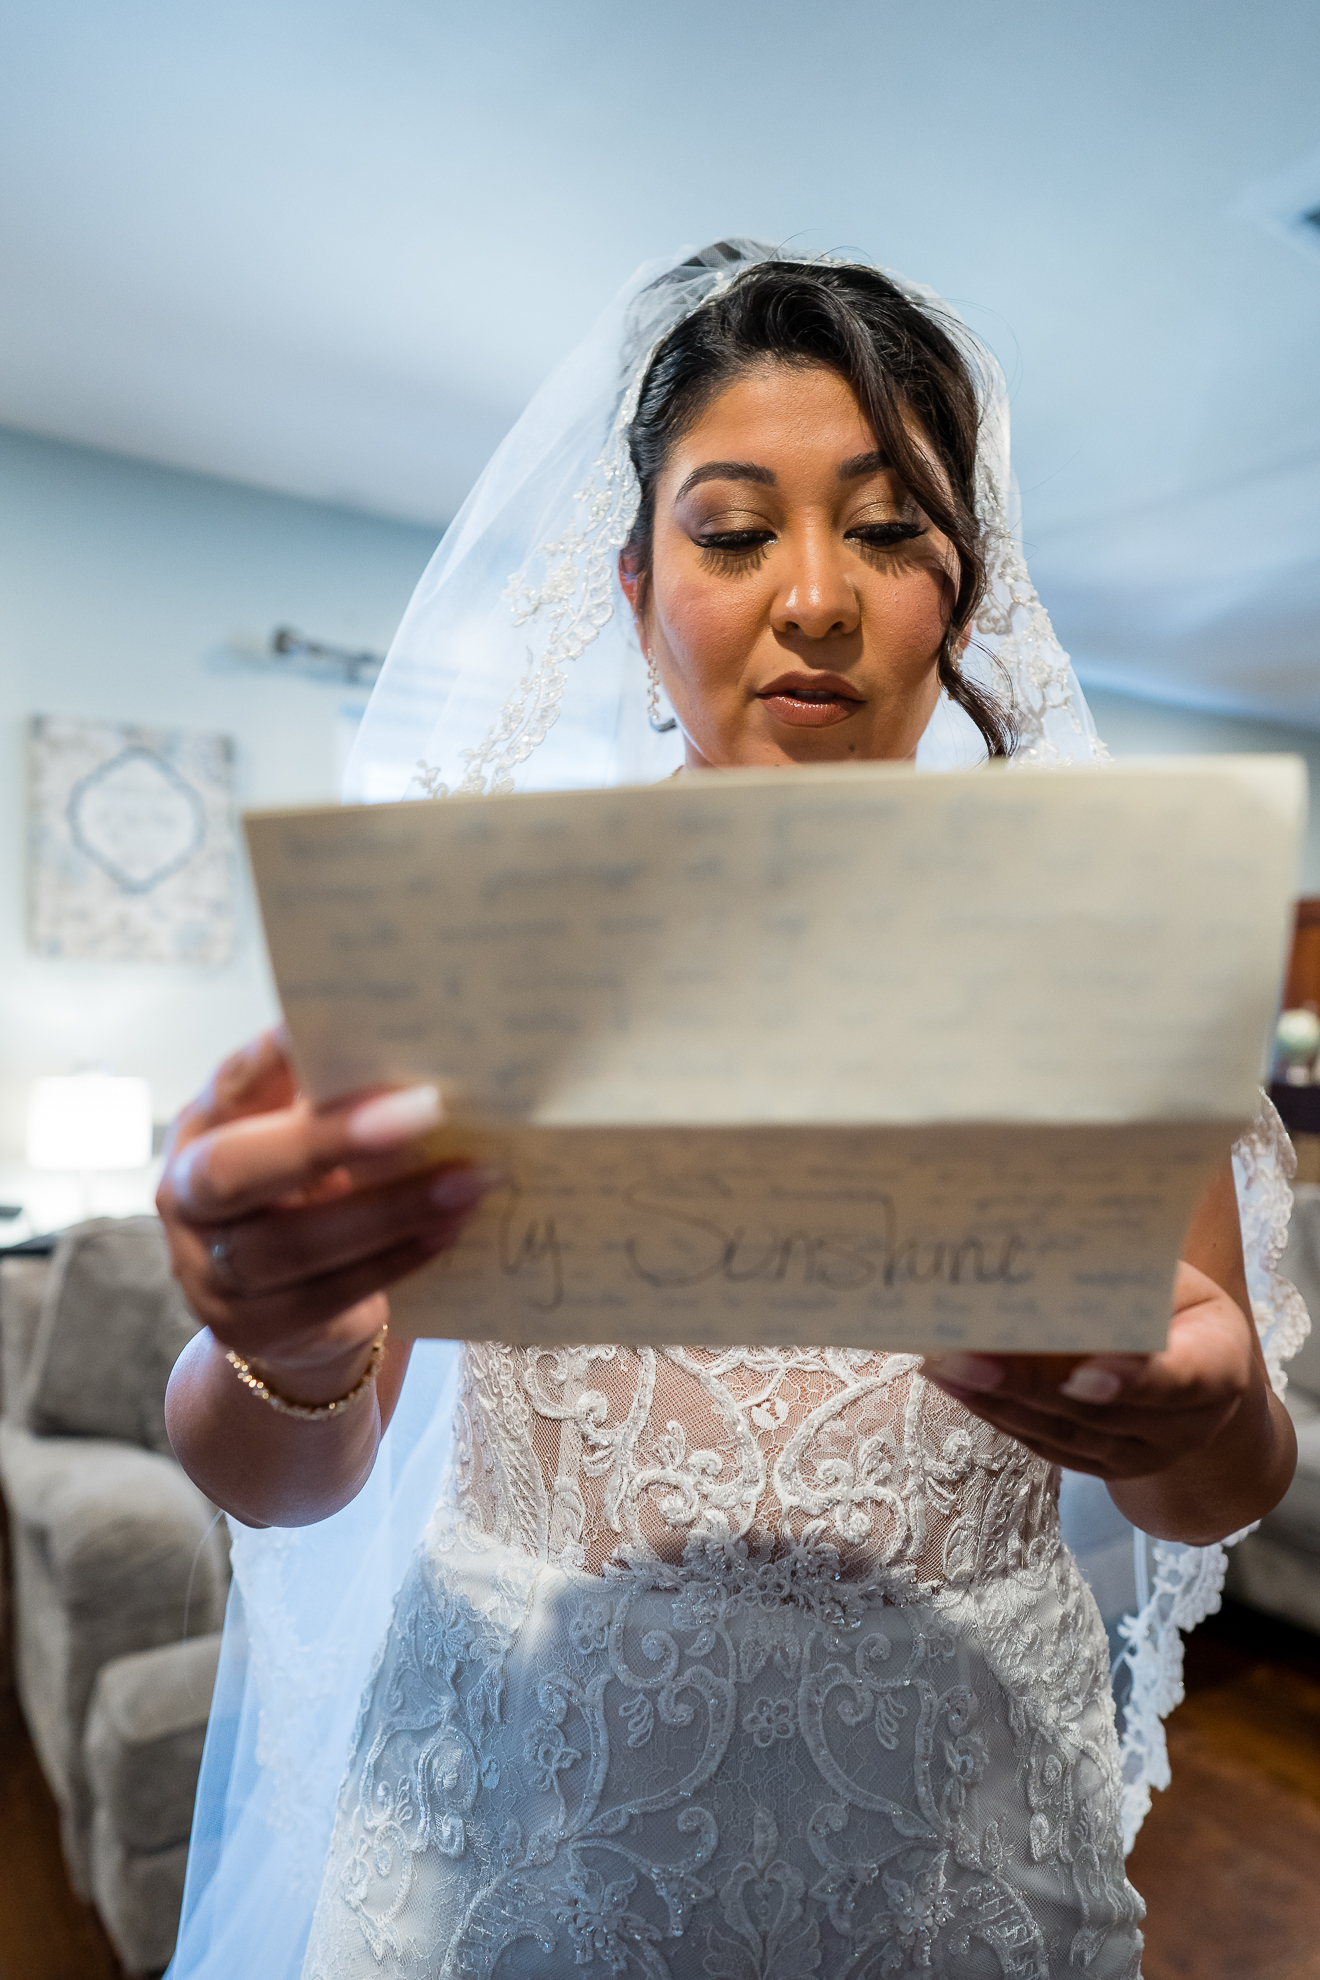 ThomasKim_photography Keywords used: S & A

Description: A bride reads a letter to her spouse.